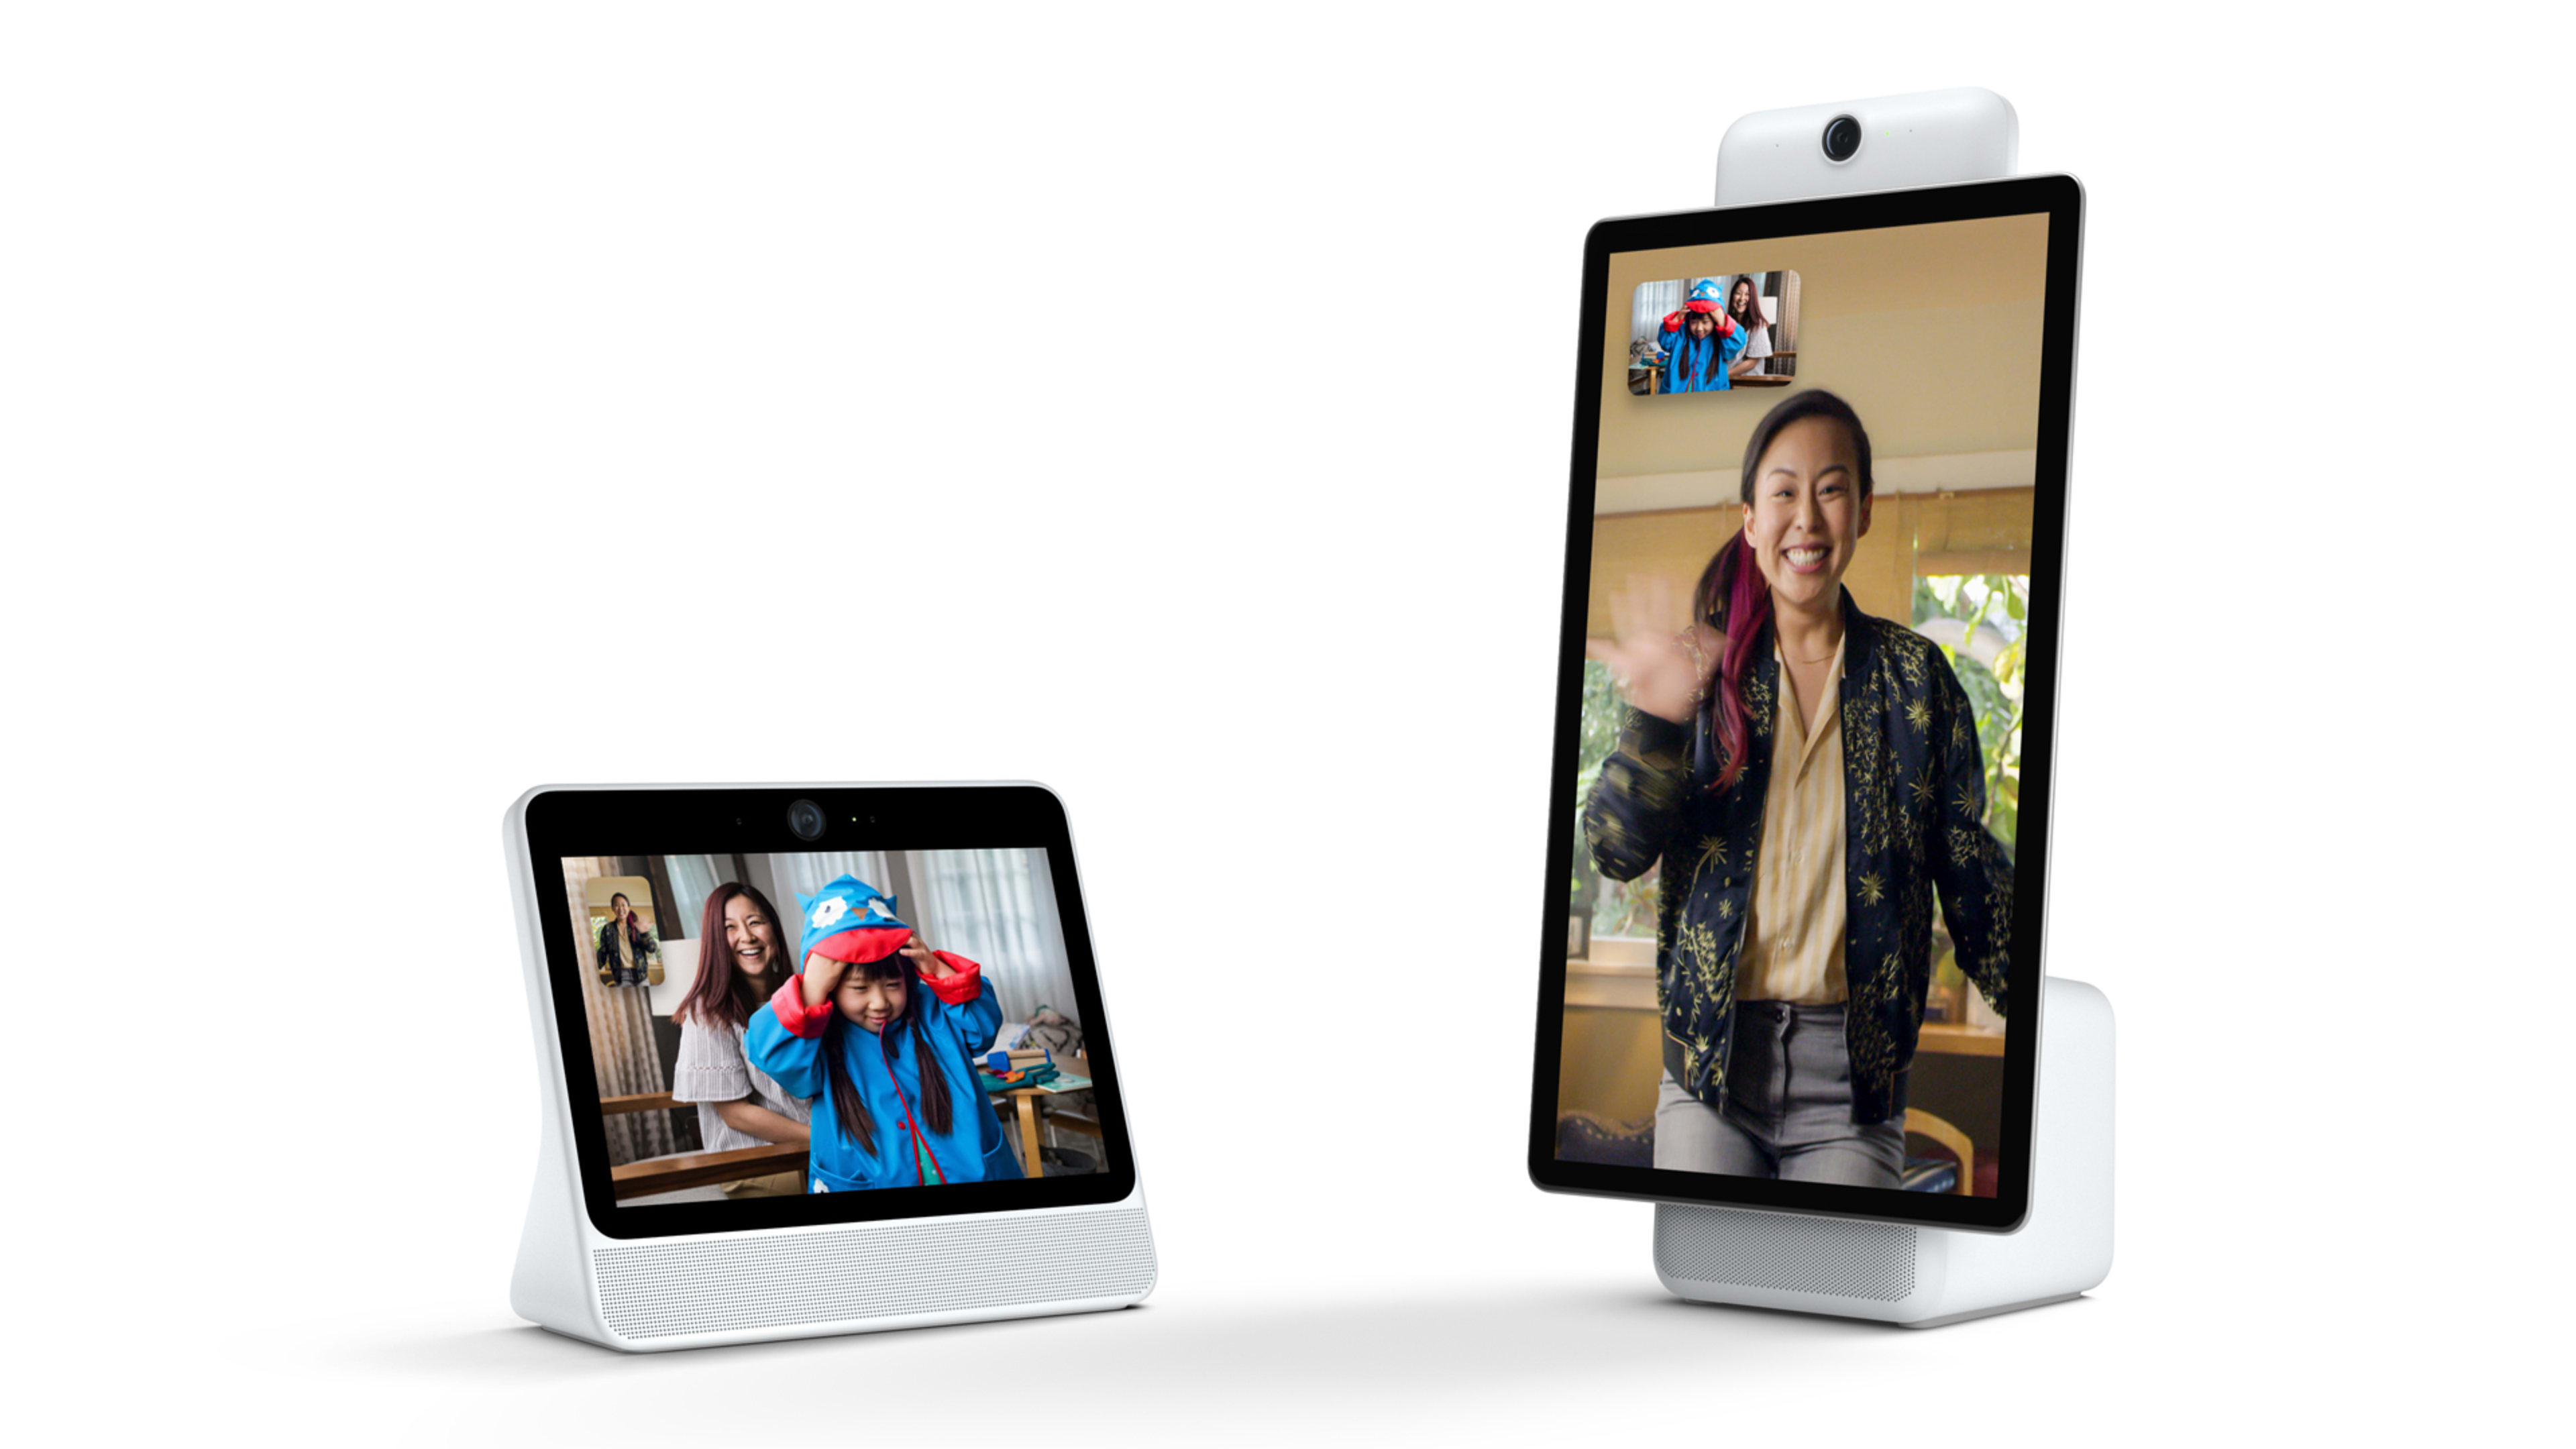 Facebook swears its Portal video chat device won’t violate your privacy